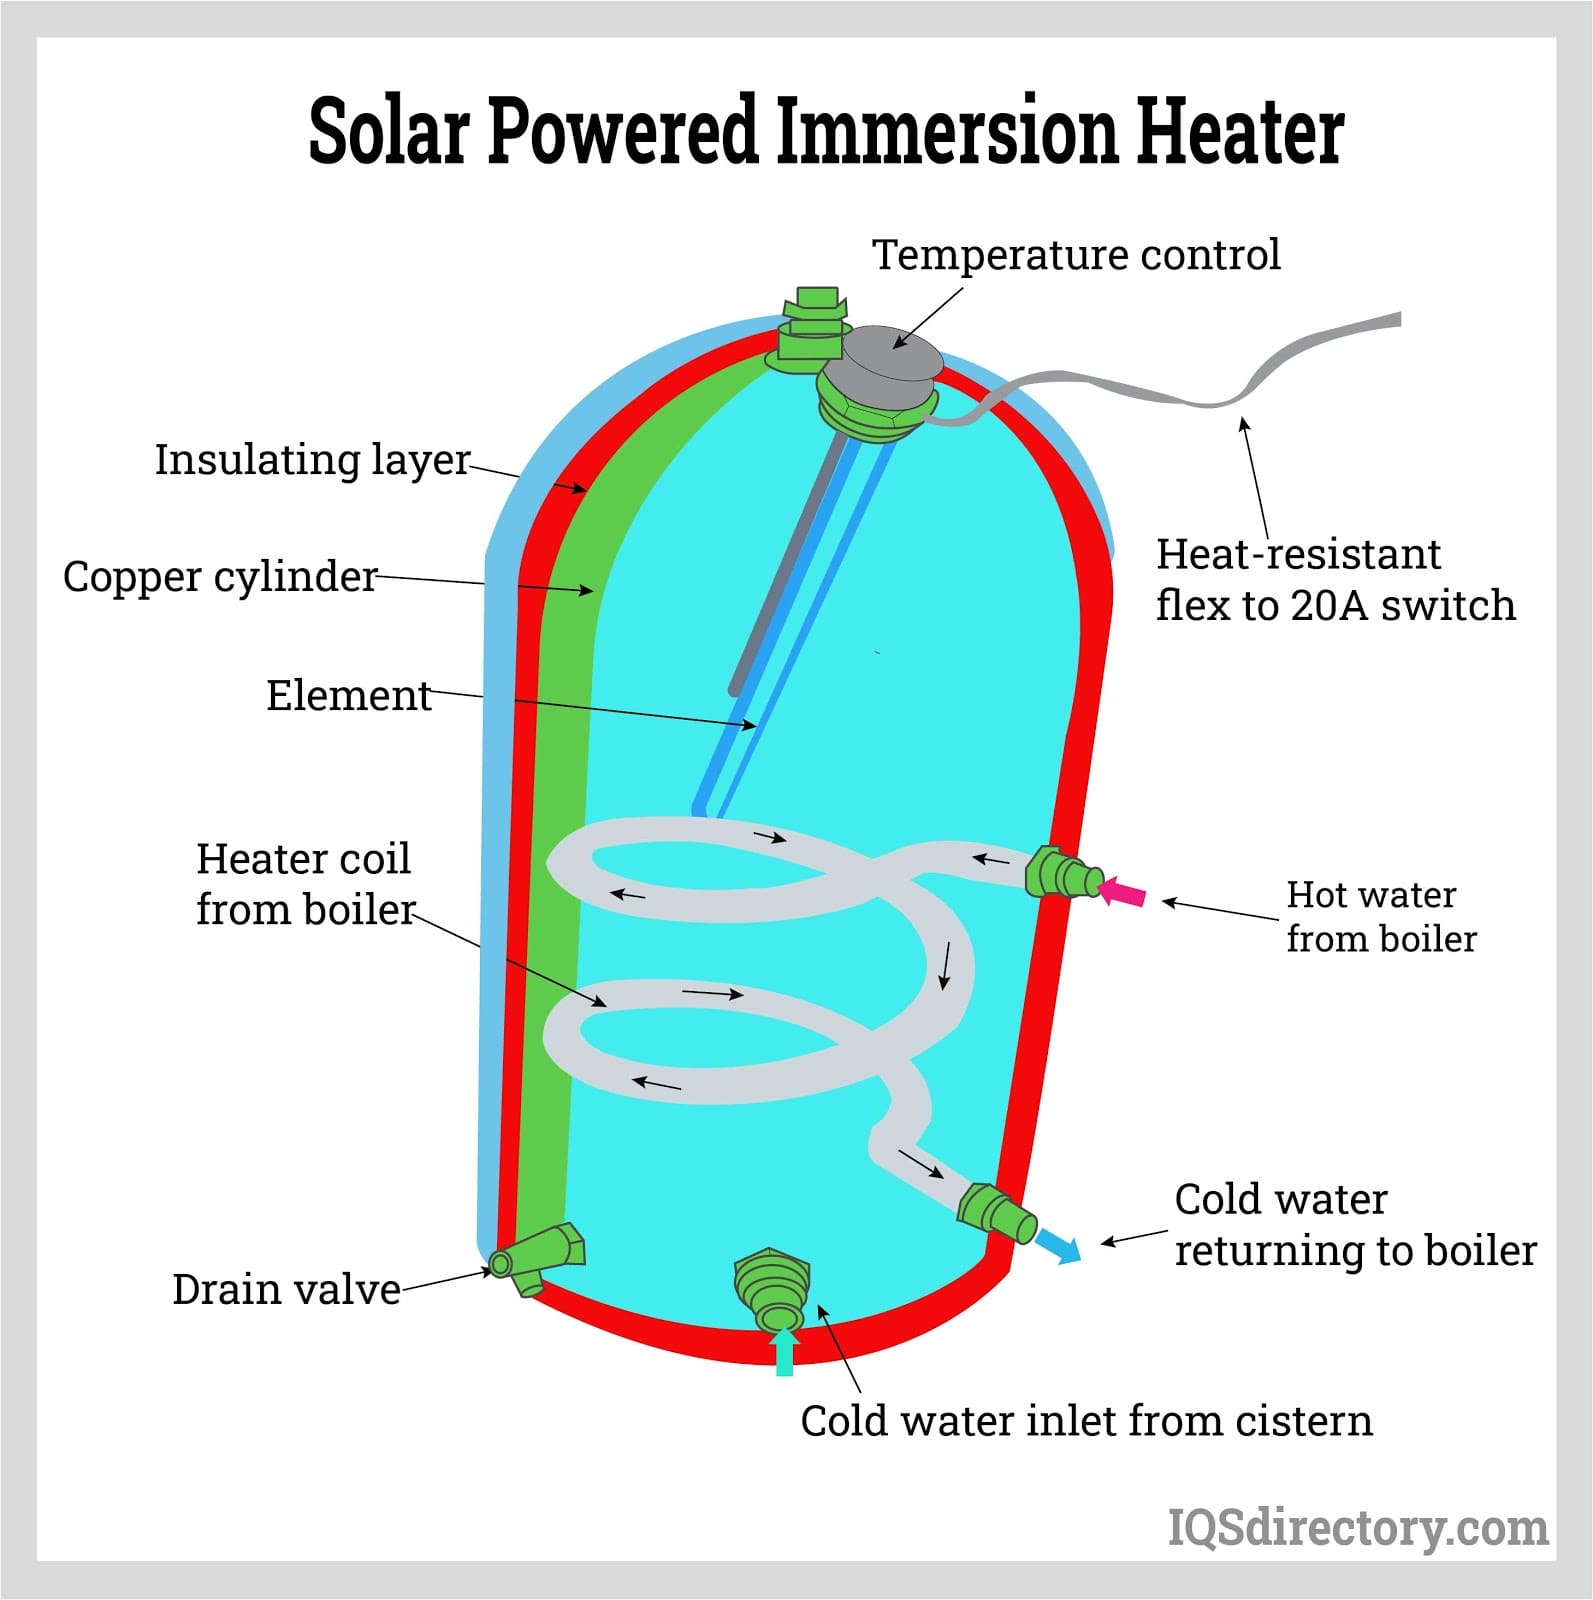 Solar Powered Immersion Heater